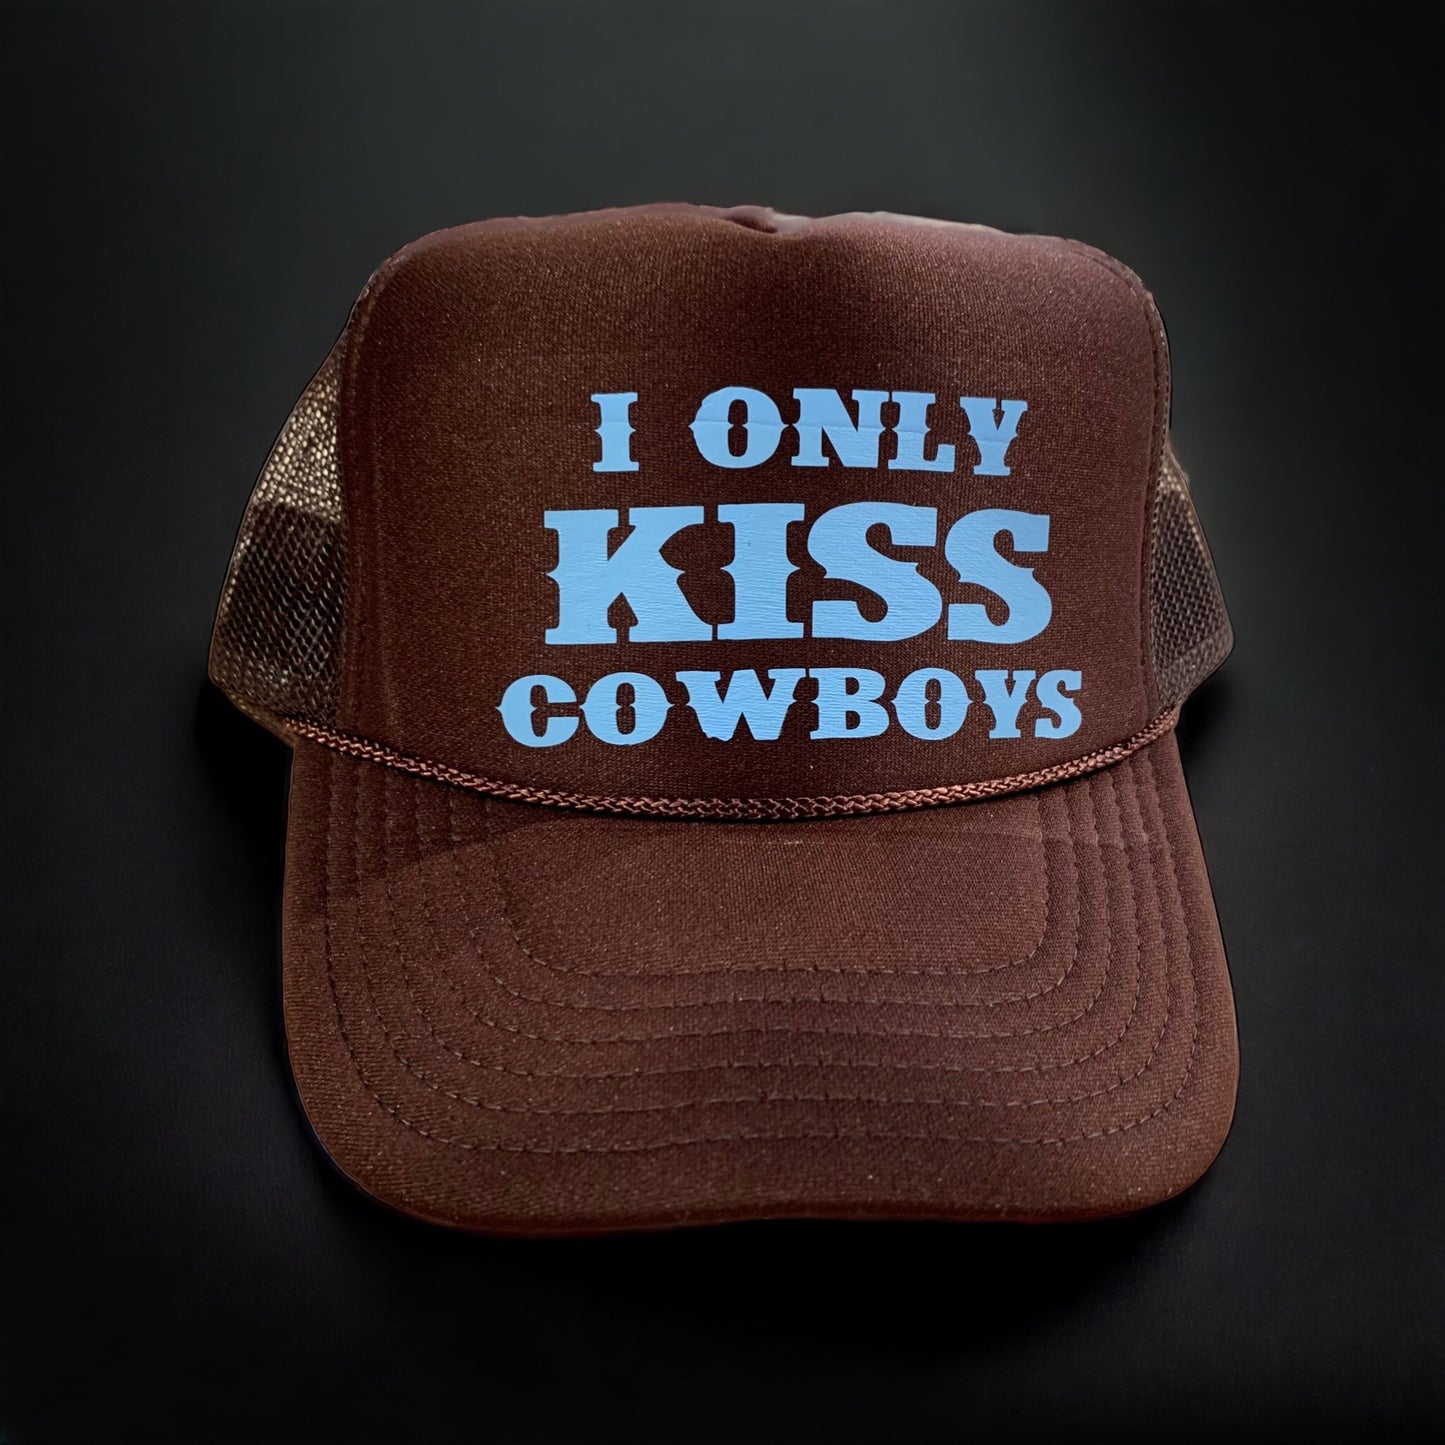 "I Only Kiss Cowboys" Trucker Hat